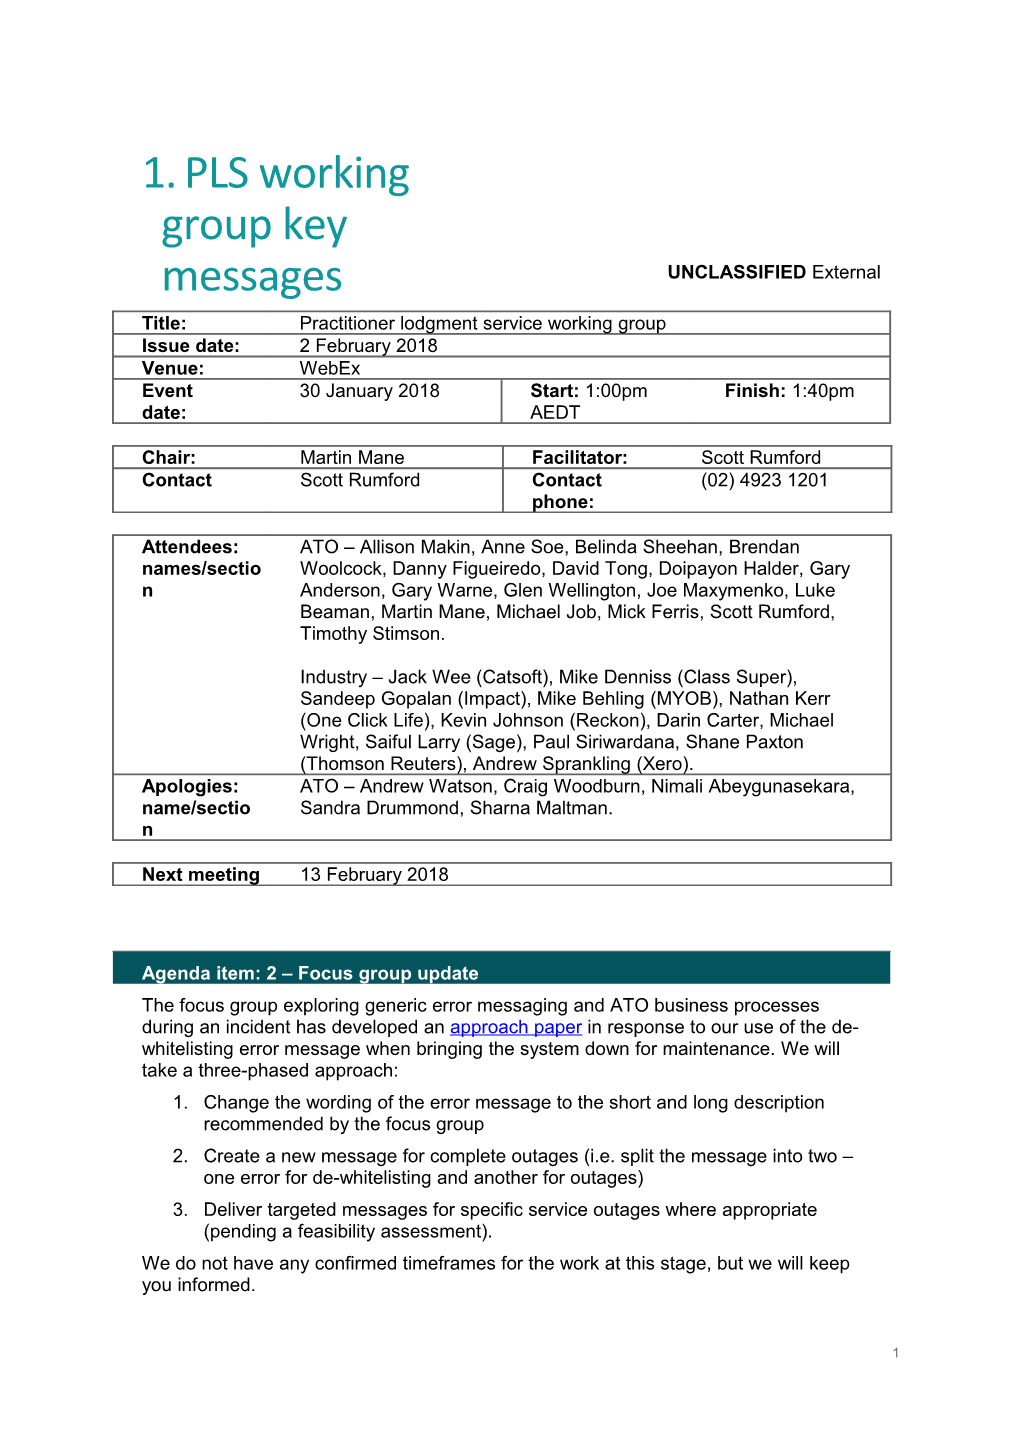 PLS Working Group Key Messages